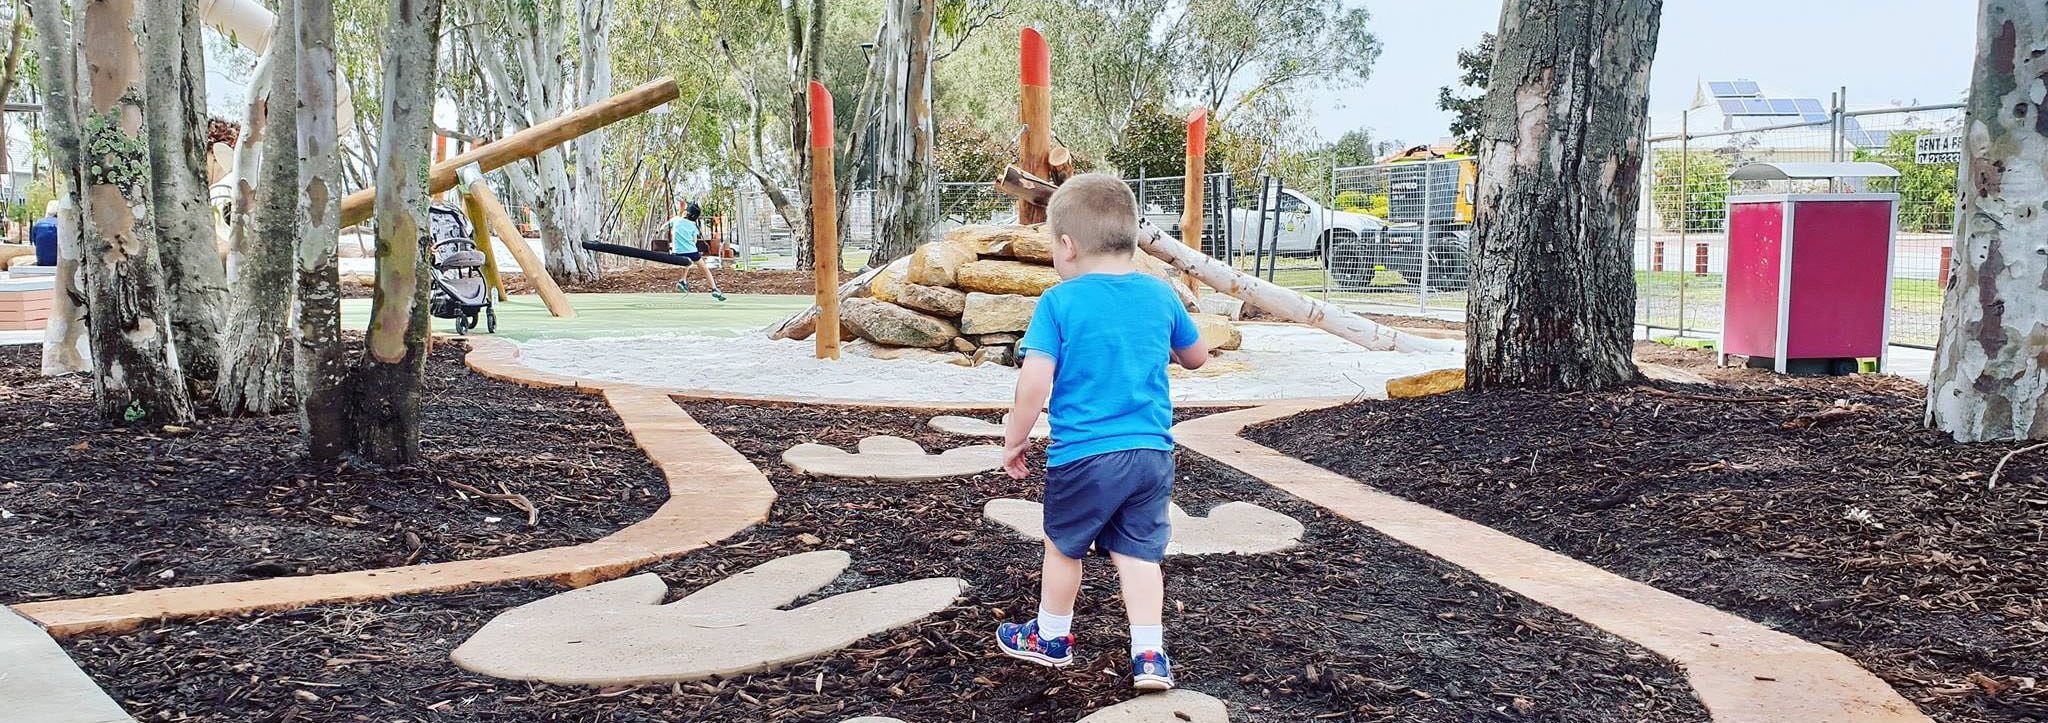 Monsters World is only one of the fun parks in Baldivis. The theme is cute and the kids will love all of the activities. If you're looking for building opportunities in Baldivis, look no further than Move Homes.